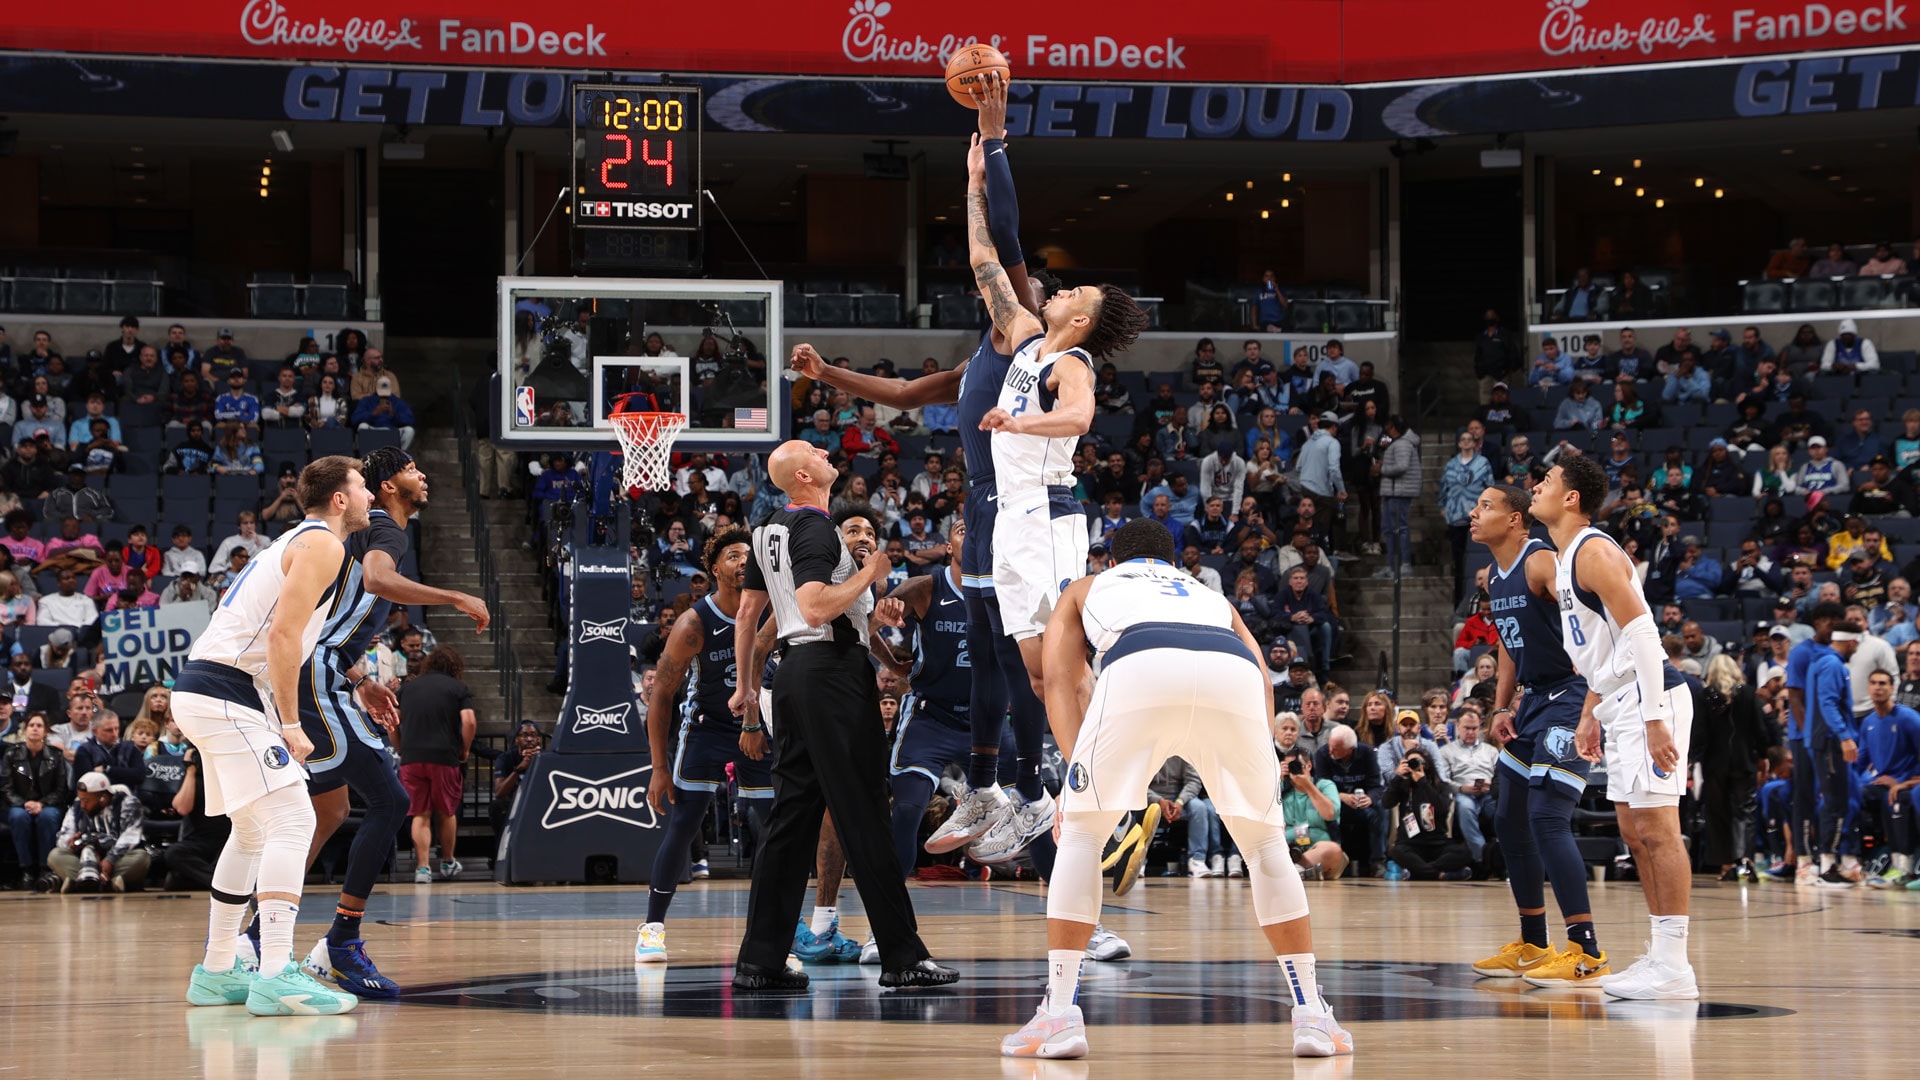 MikeCheck: Growth-seeking Grizzlies endure early struggles as ‘part of learning process’